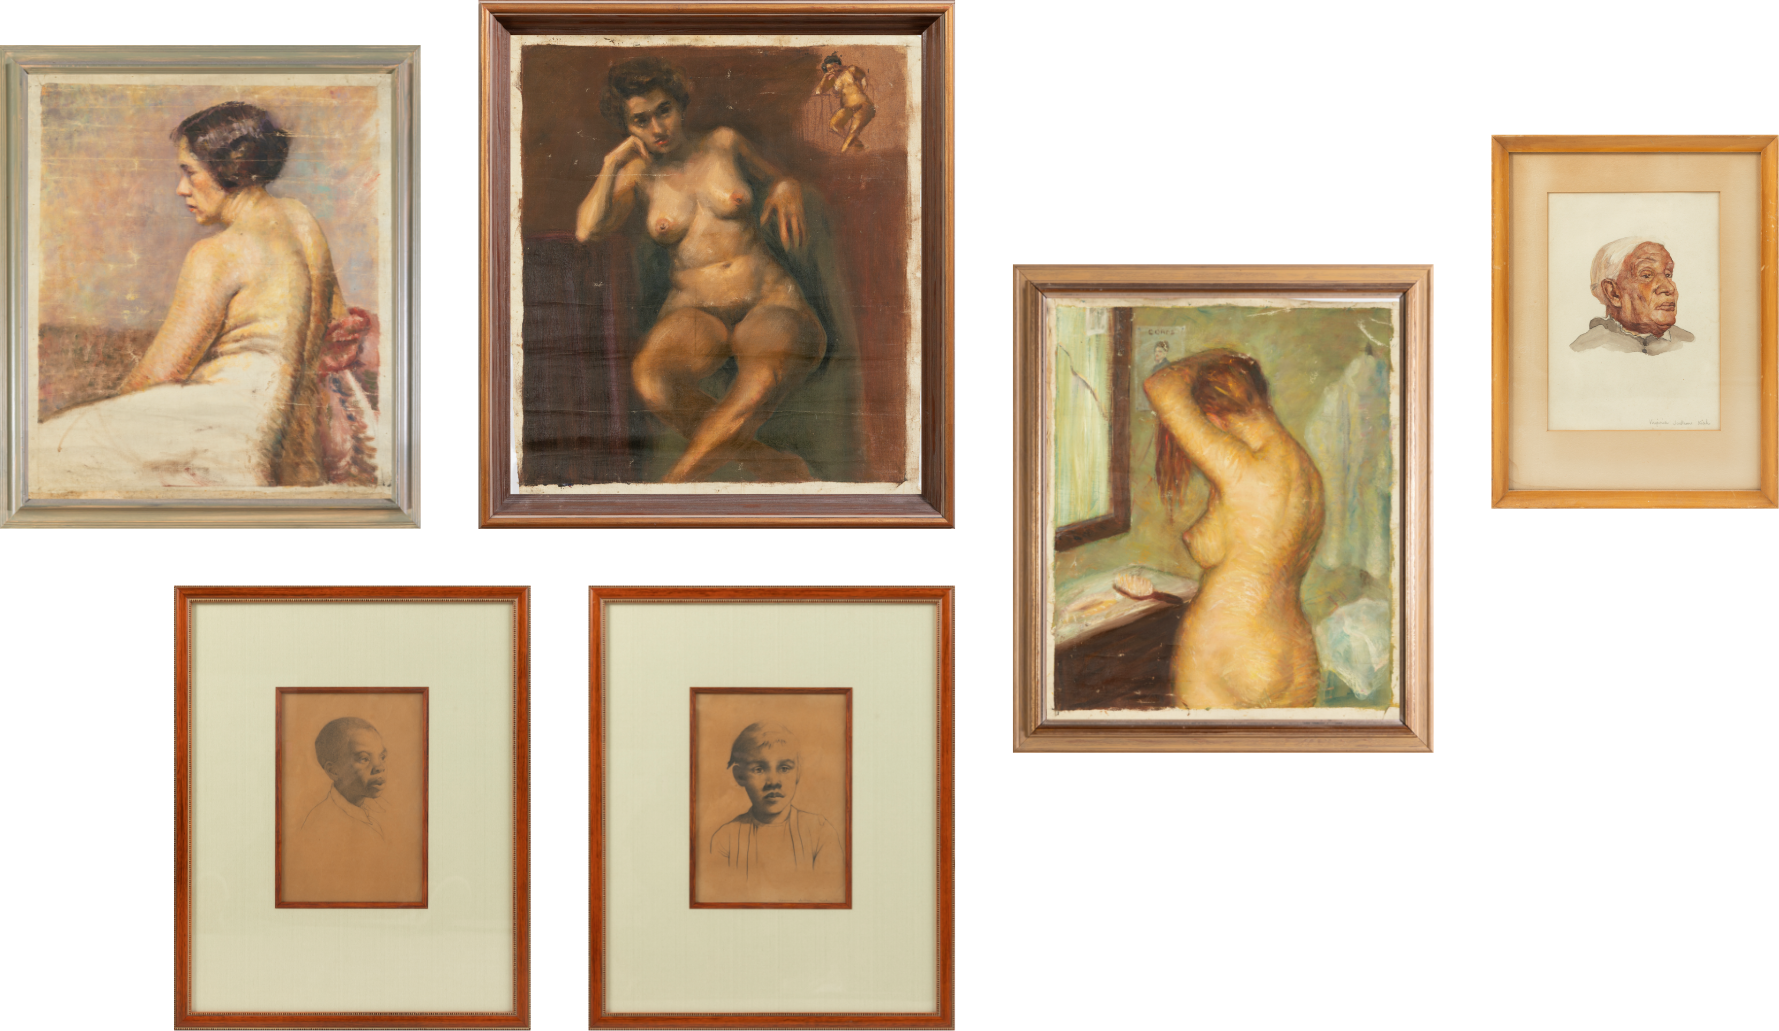 'Live Your Vision,' nudes and sketches